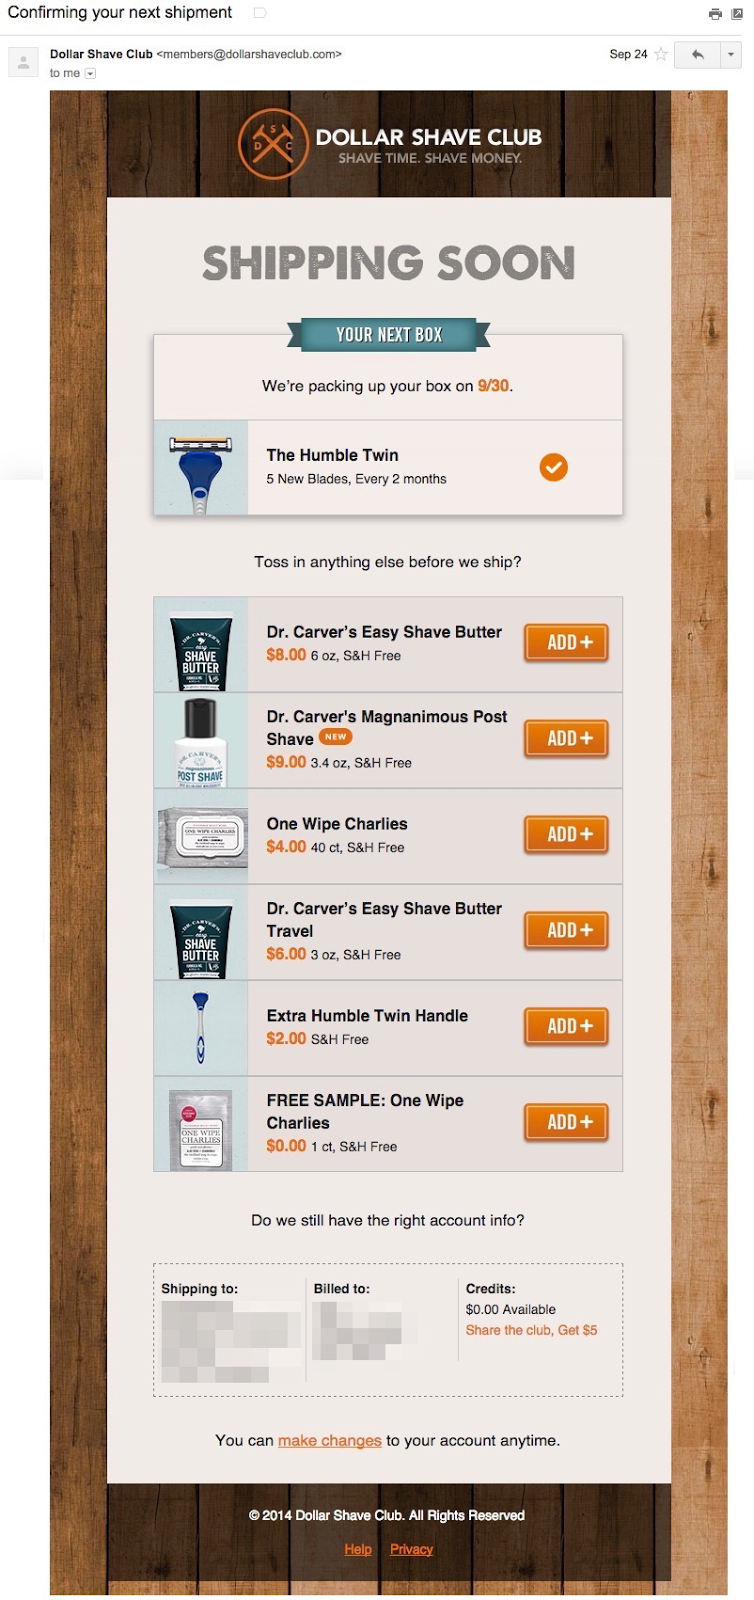 How To Send Behavioral Emails That Will Boost Your Conversions image dollar shave club email.png